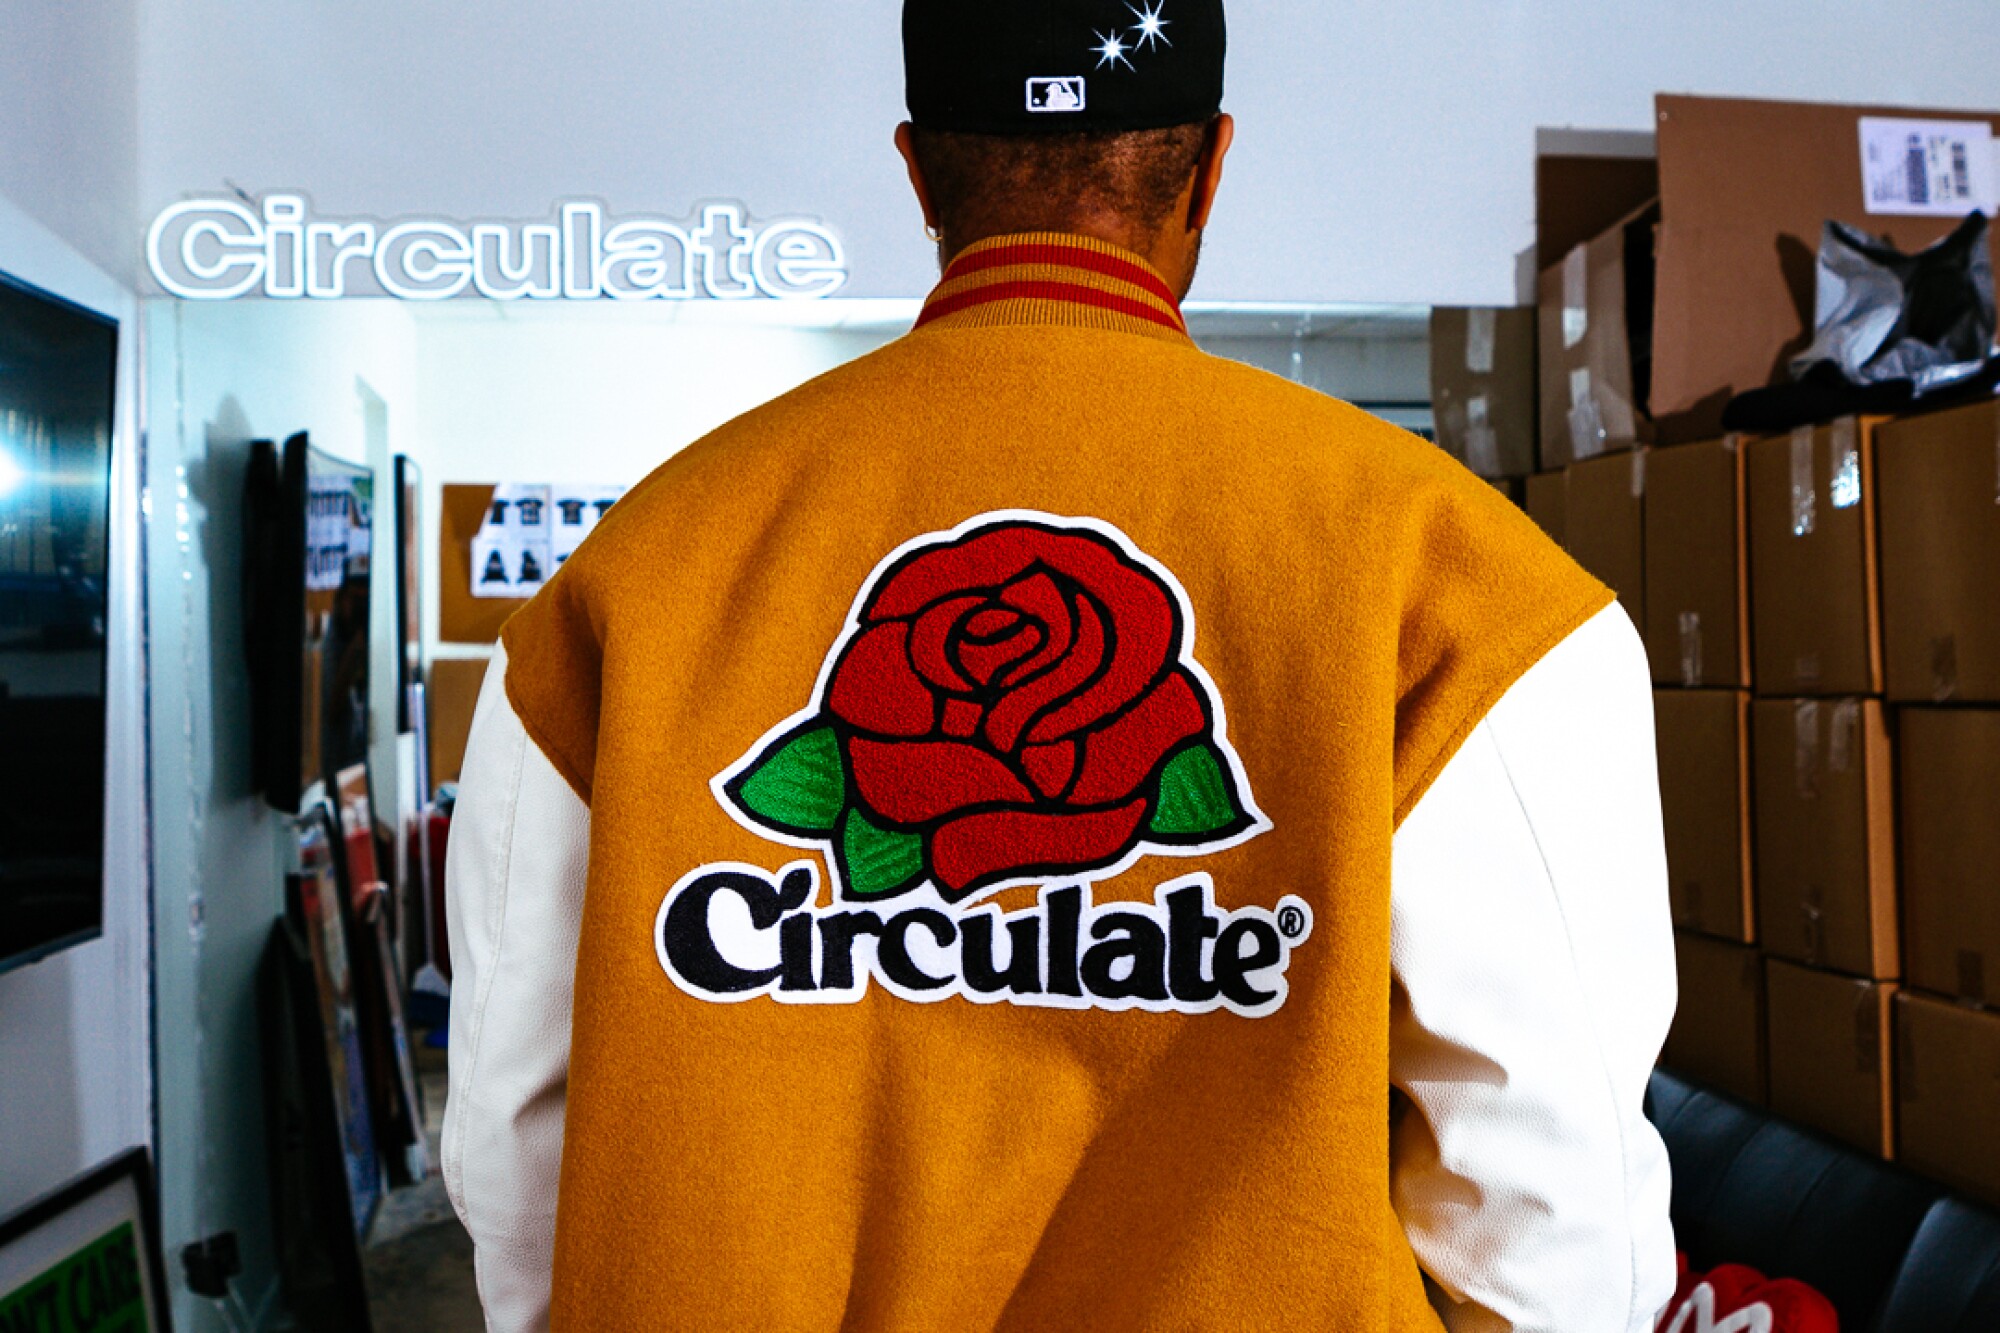 Streetwear designer seen from behind wearing an orange jacket with a red rose and the word "Circulate" on it.